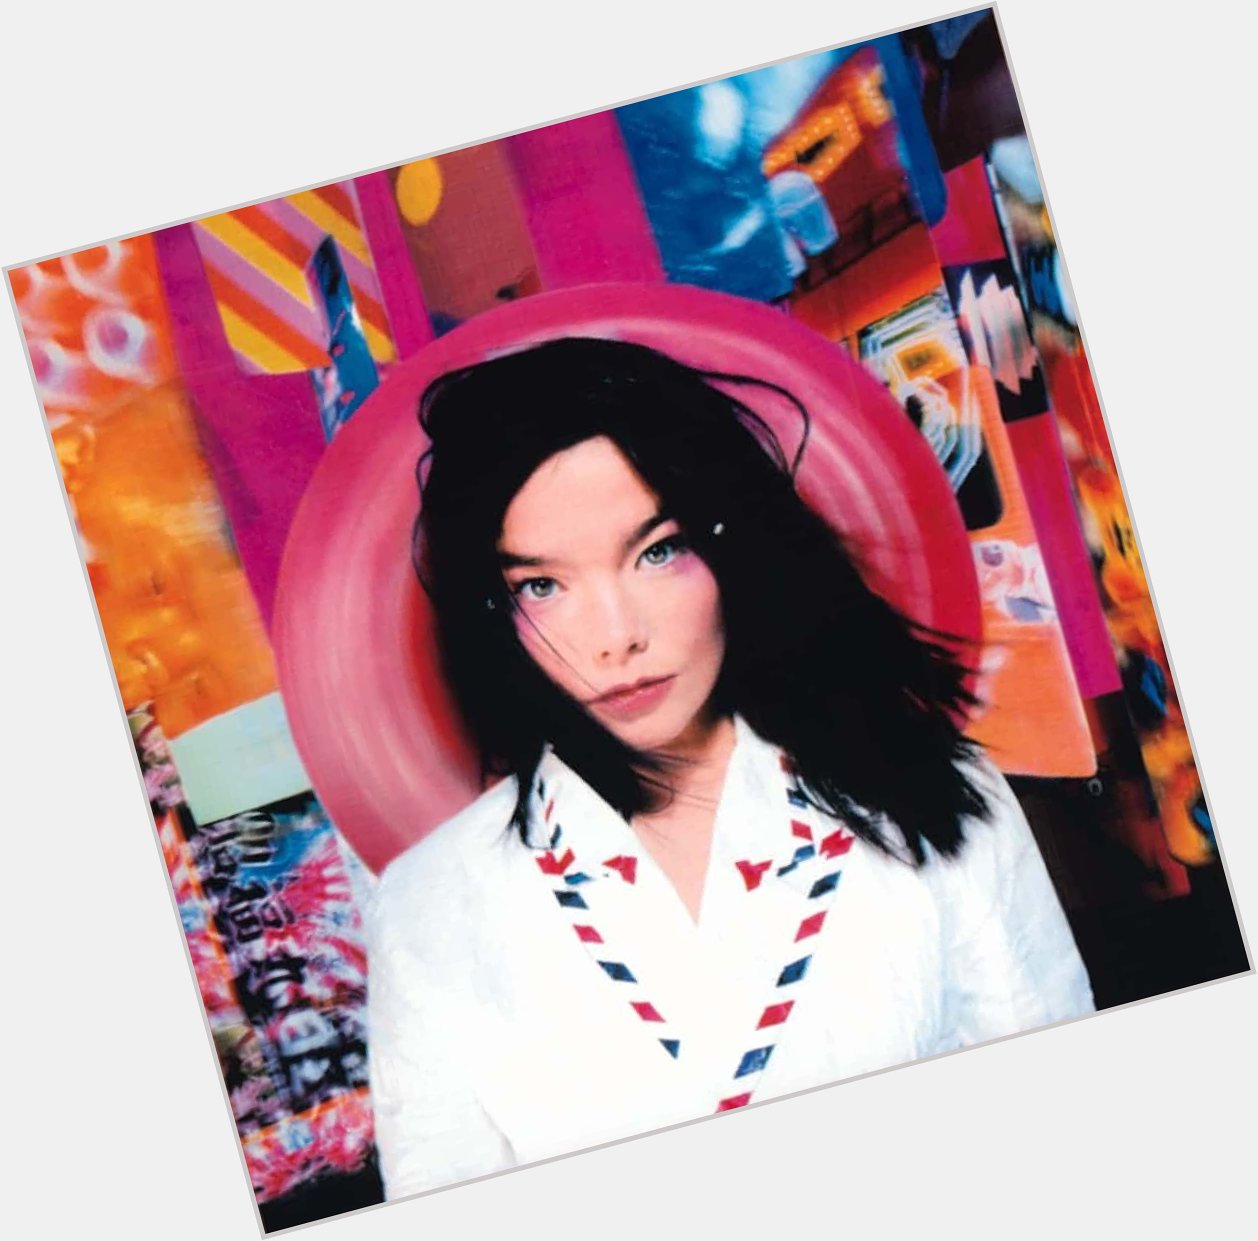 Today is most blessed day of all time. happy birthday bjork and carly rae jepsen 